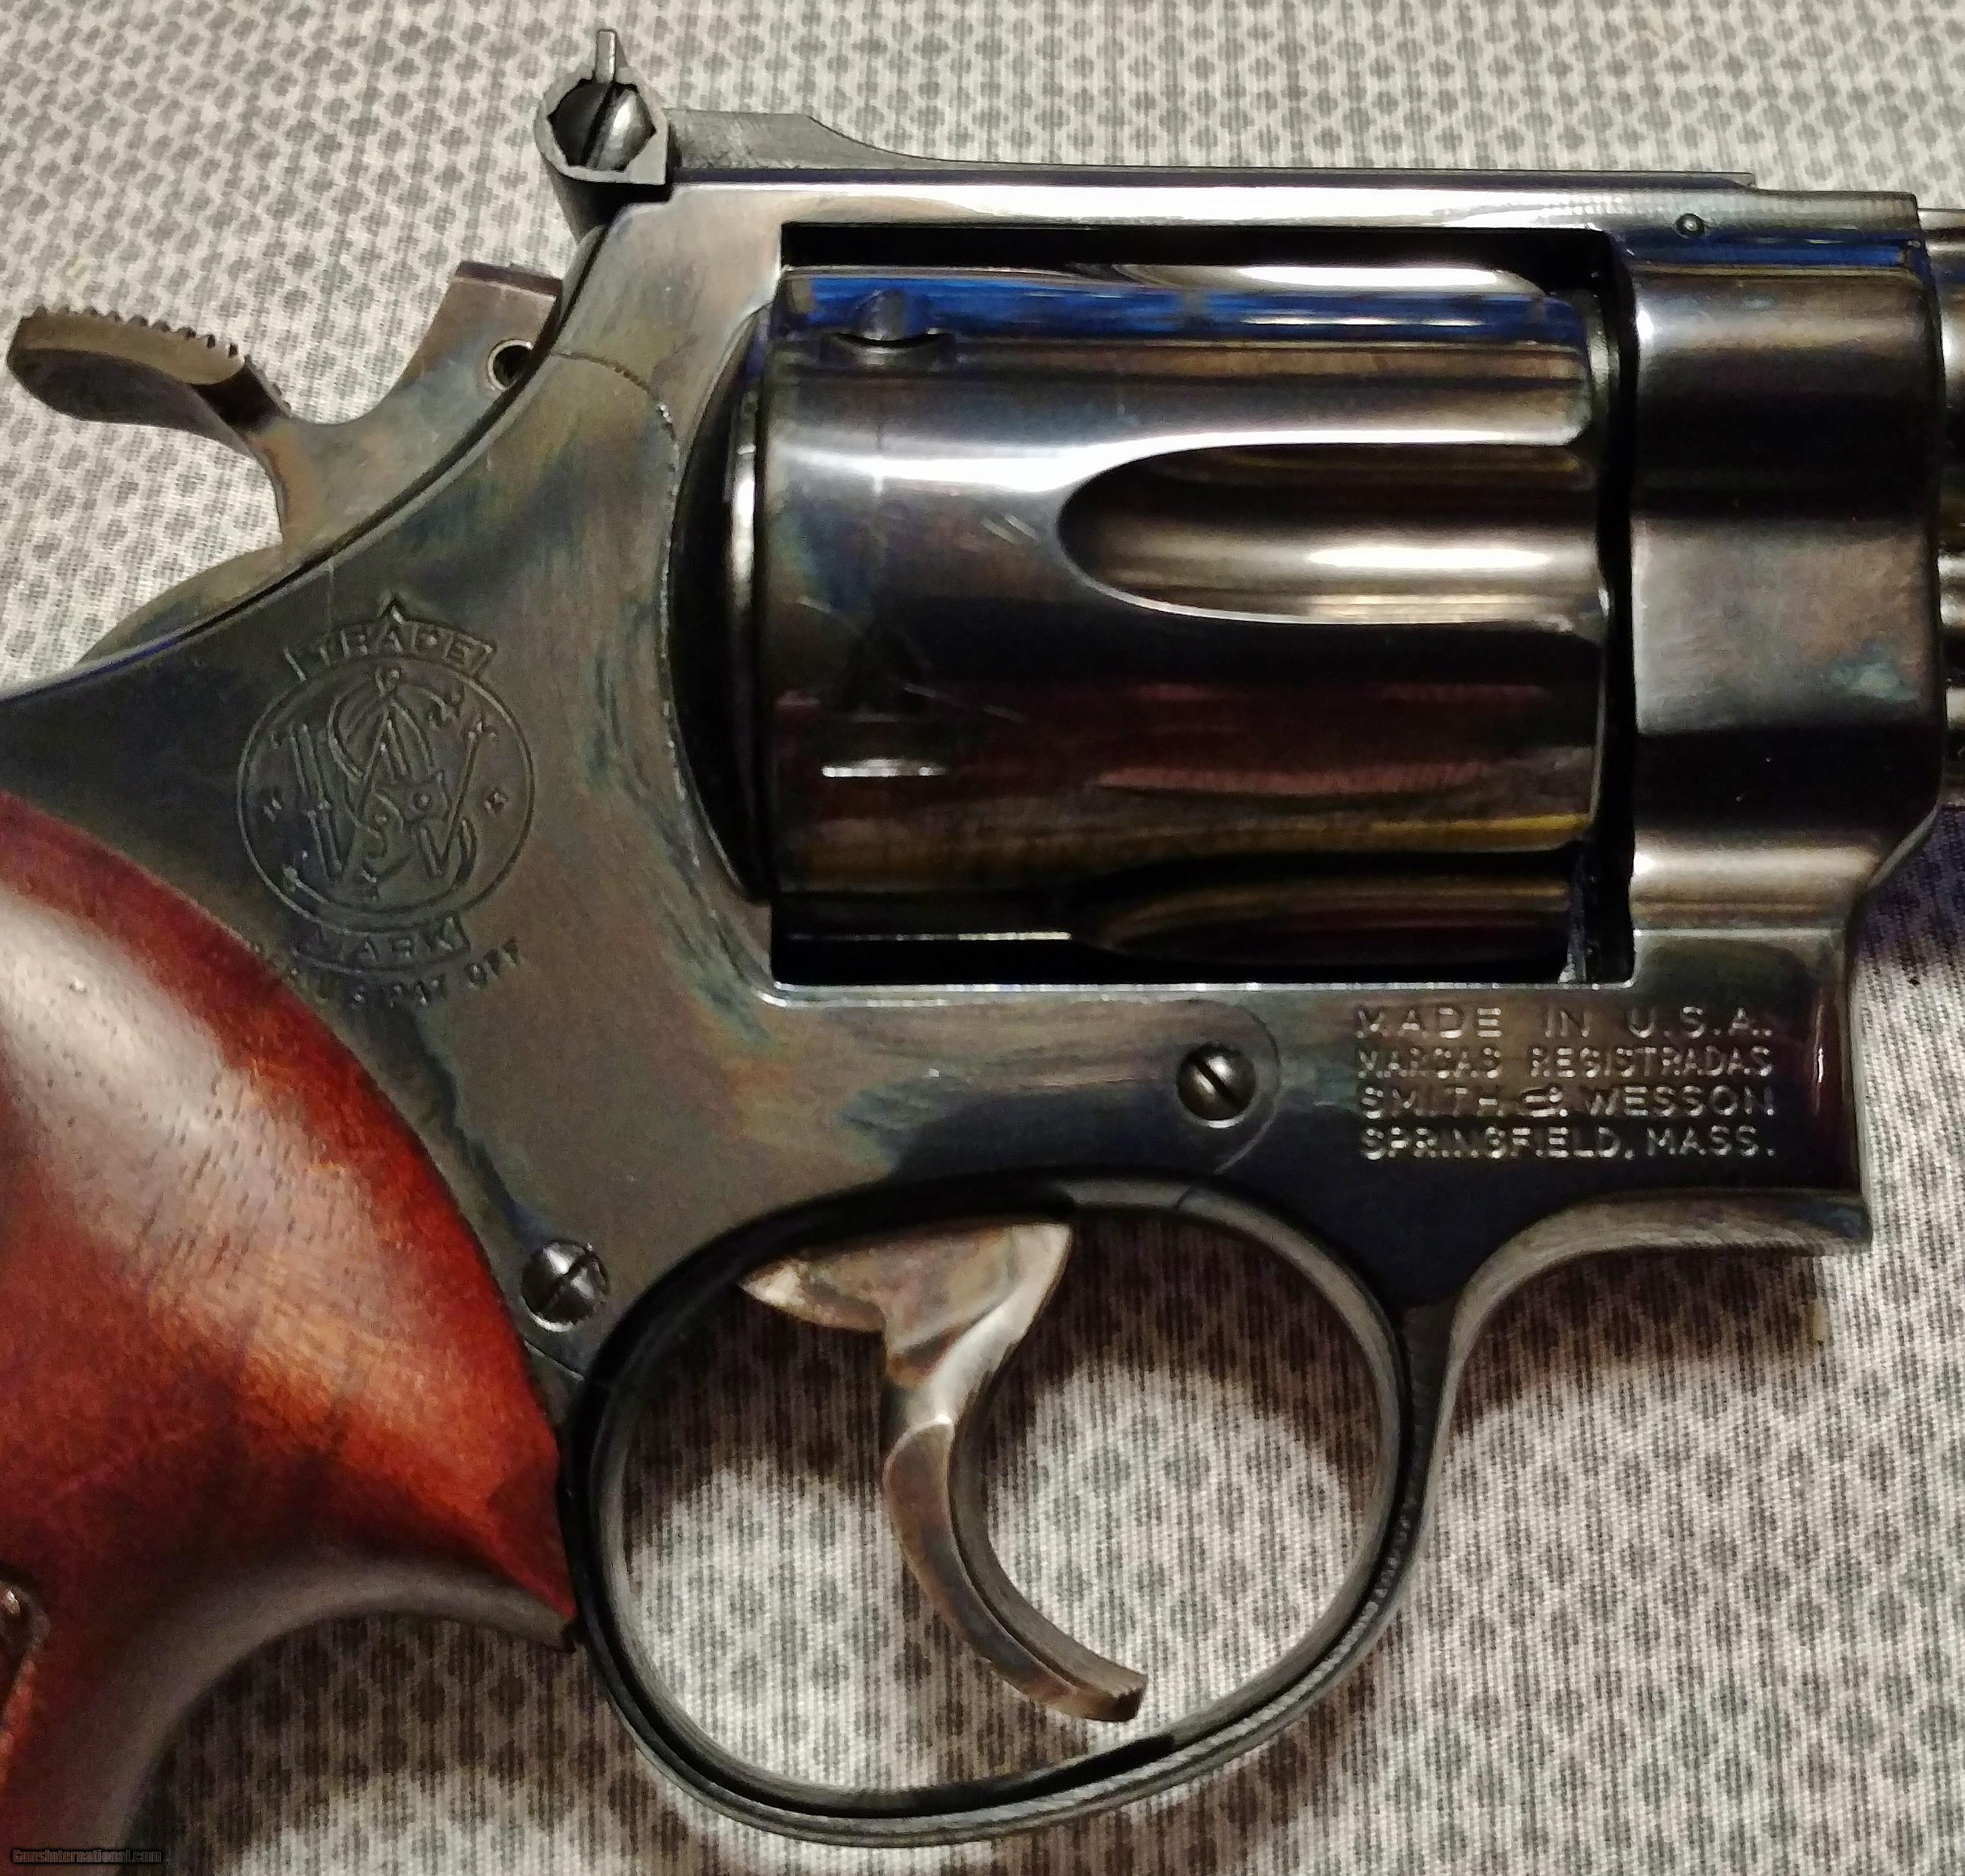 How to find smith and wesson model number